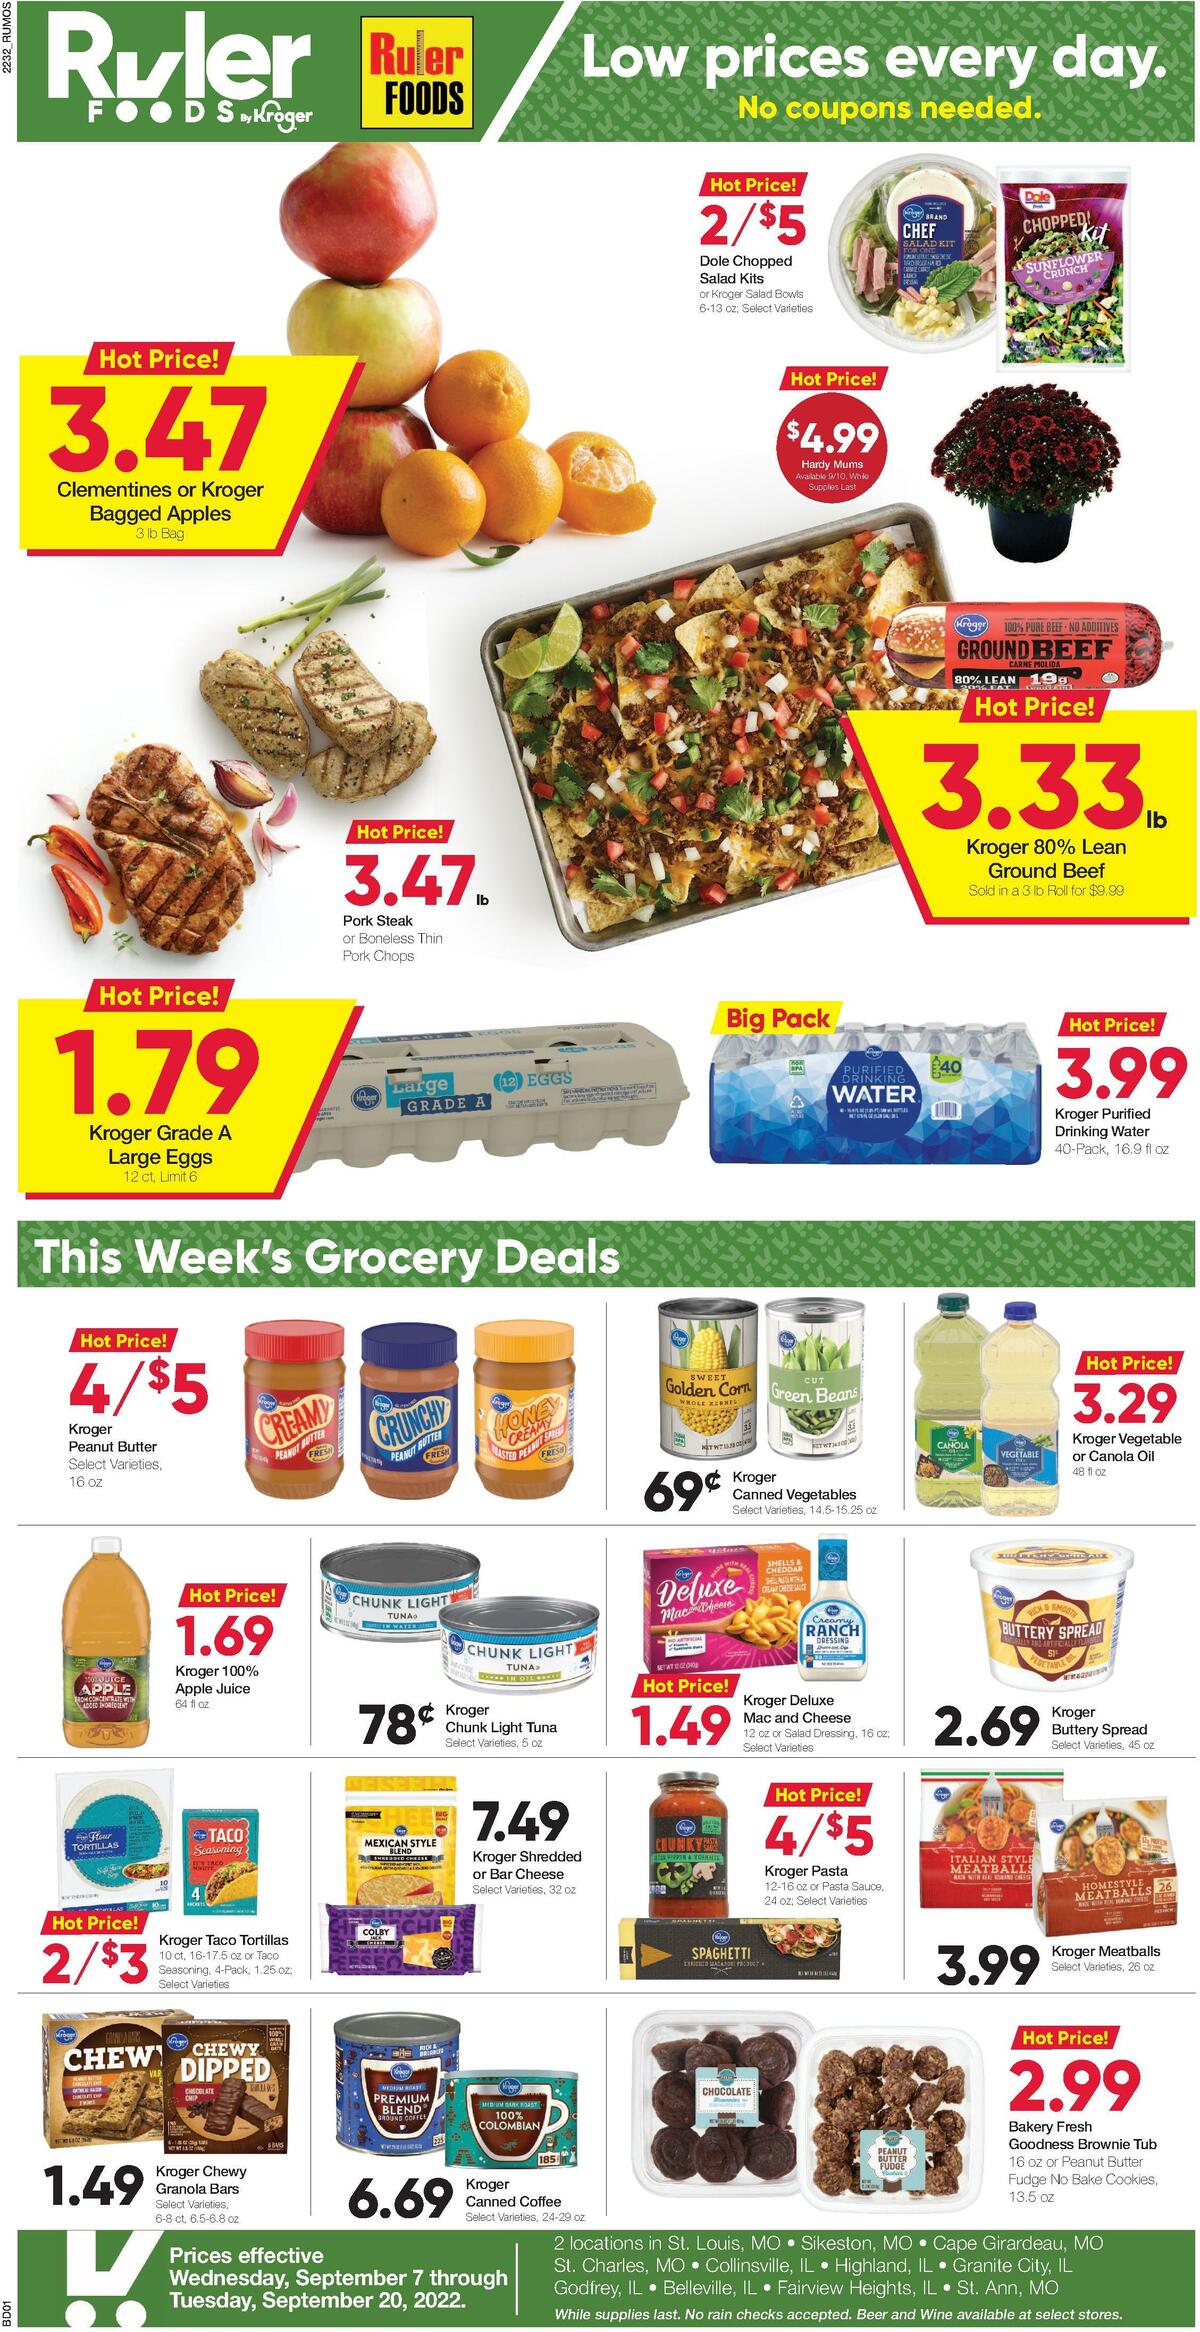 Ruler Foods Weekly Ad from September 7